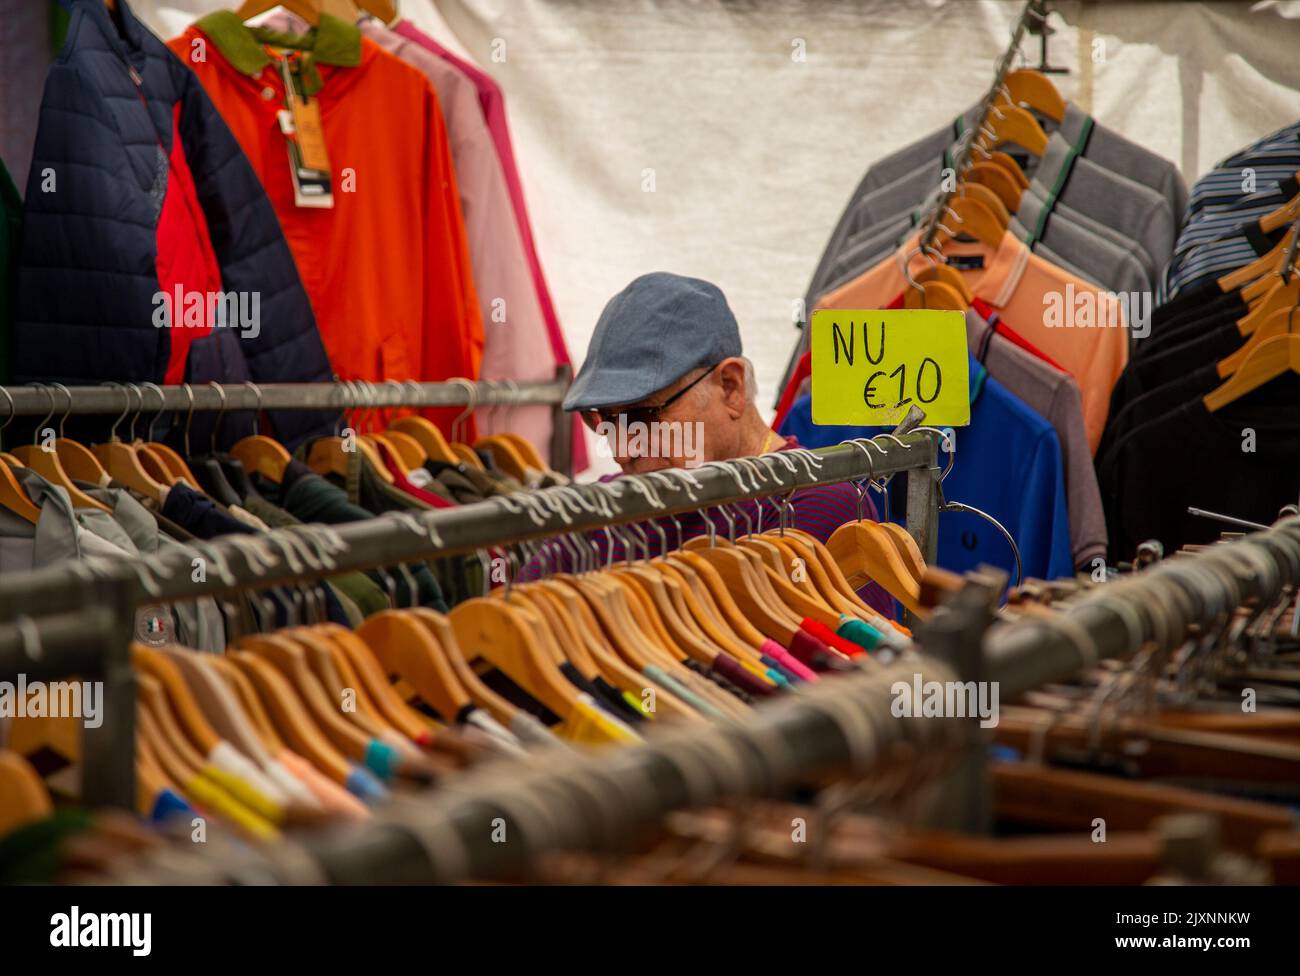 Man browsing at an outdoor market in Amsterdam Stock Photo